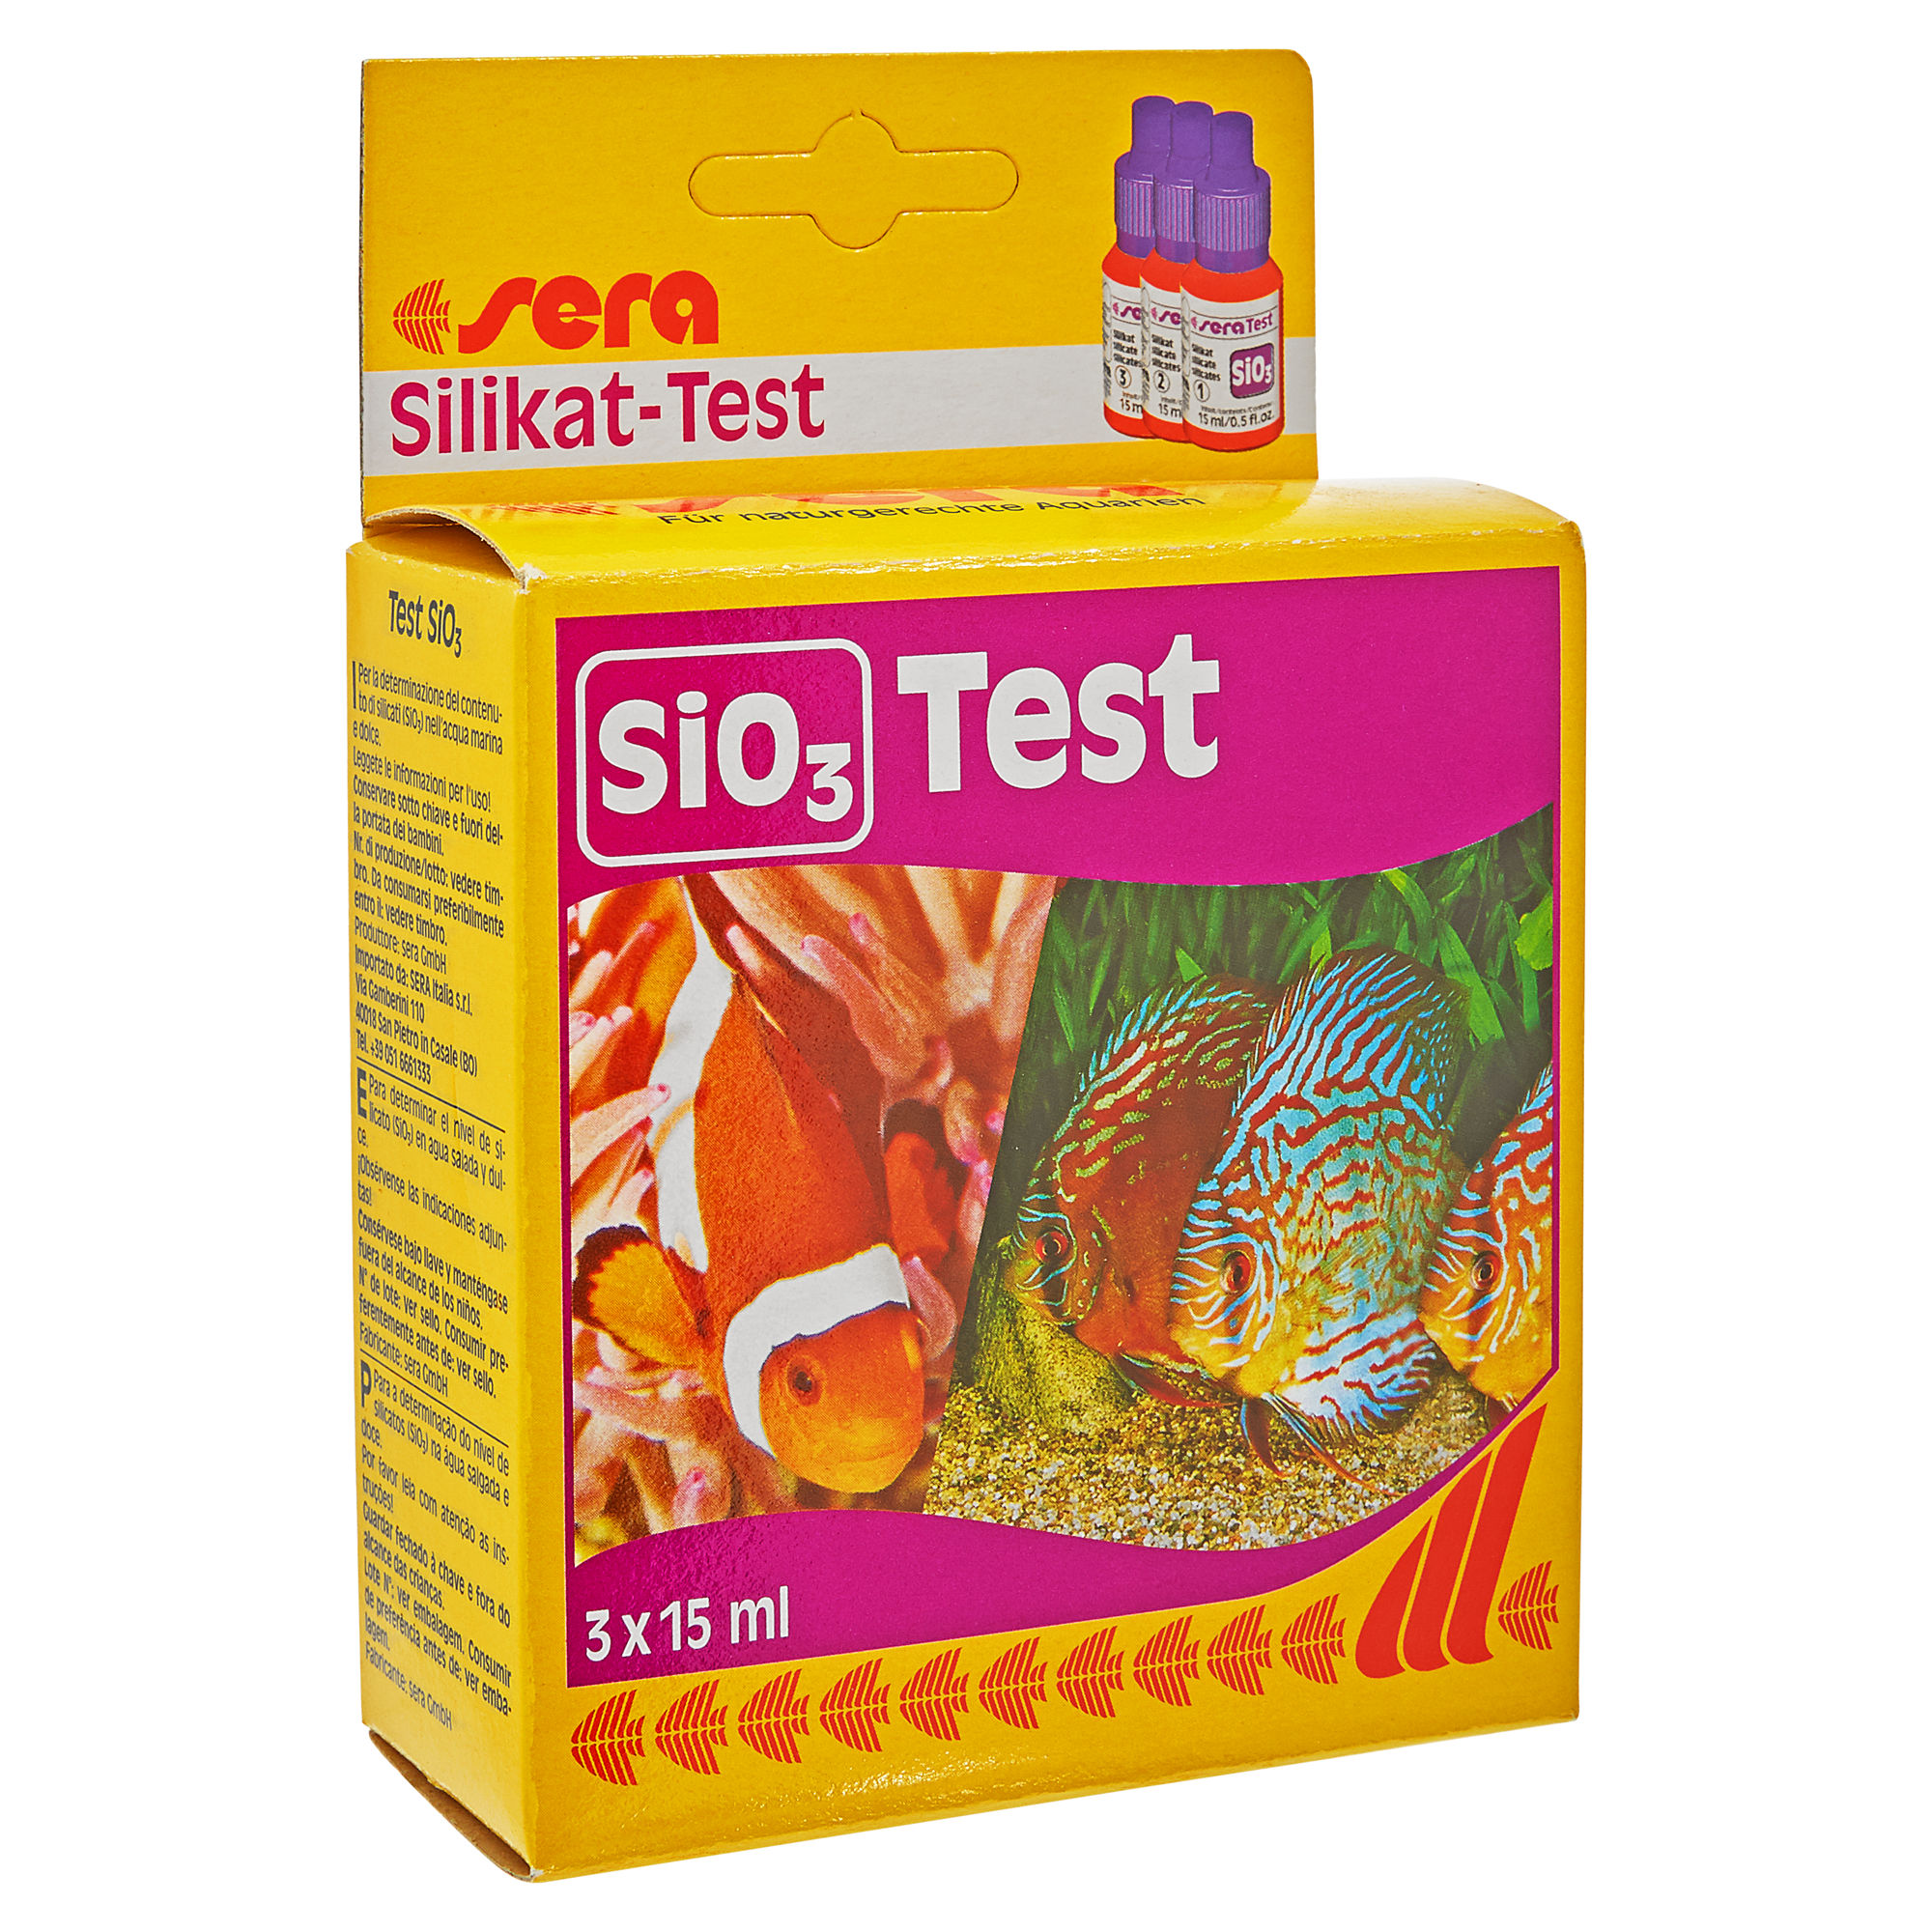 Silikat-Testset "SiO3" 3x 15 ml + product picture